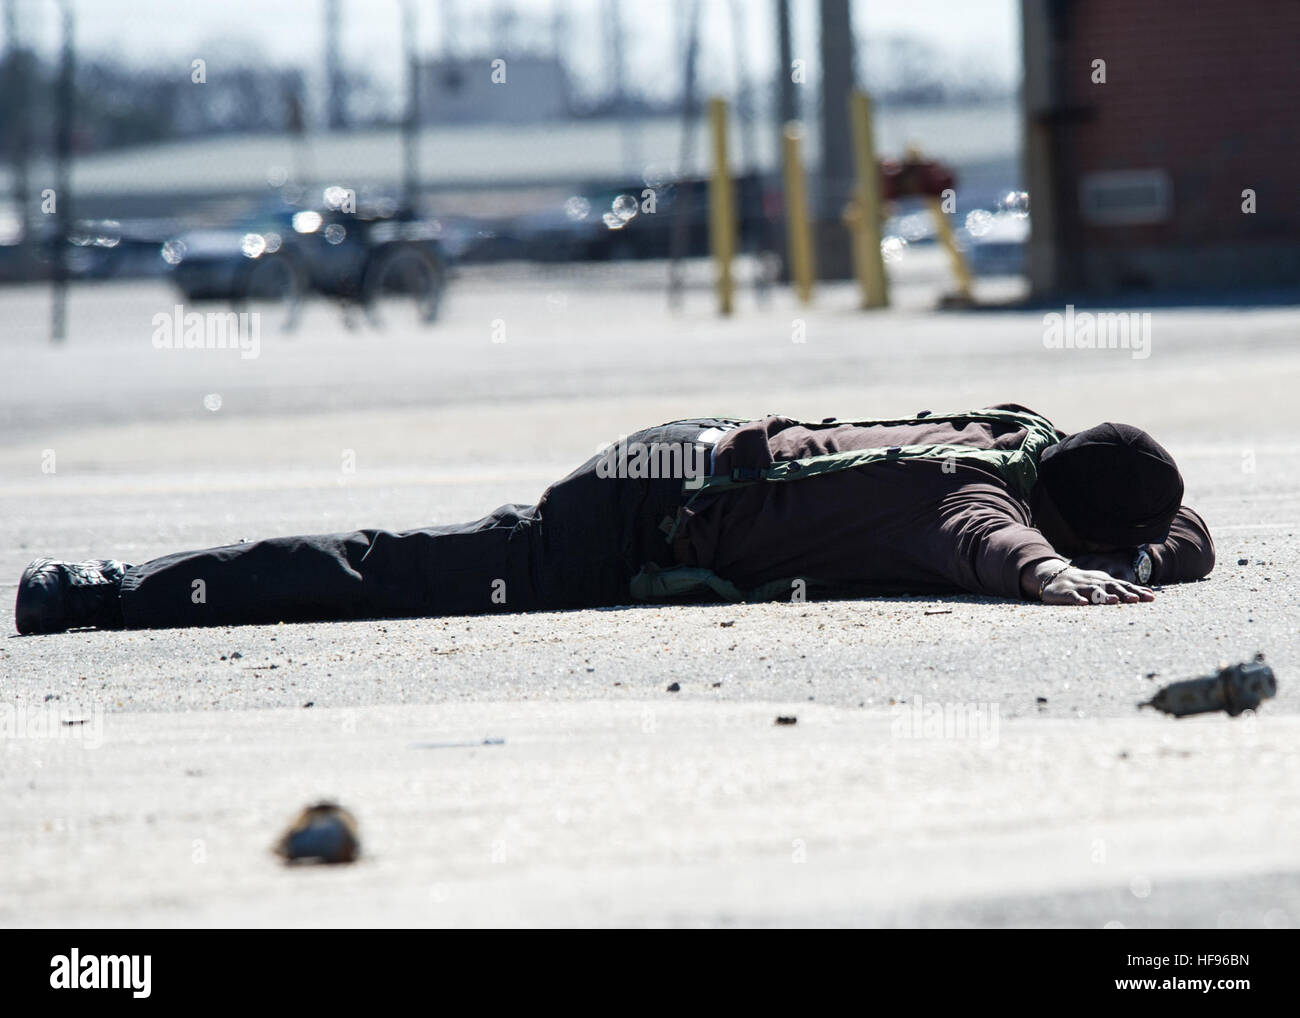 Charles Streat lays on the ground after being disarmed by U.S. Navy police Feb. 27, 2014, during a vehicle-borne improvised explosive device response exercise as part of Solid Curtain-Citadel Shield (SC-CS) 2014 at Naval Station Norfolk, Va. SC-CS is an annual exercise designed to enhance the training and readiness of U.S. Navy security forces to respond to threats to installations and units. (U.S. Navy photo by Mass Communication Specialist 3rd Class Andrew Schneider/Released) Charles Streat lays on the ground after being disarmed by U.S. Navy police Feb. 27, 2014, during a vehicle-borne impr Stock Photo